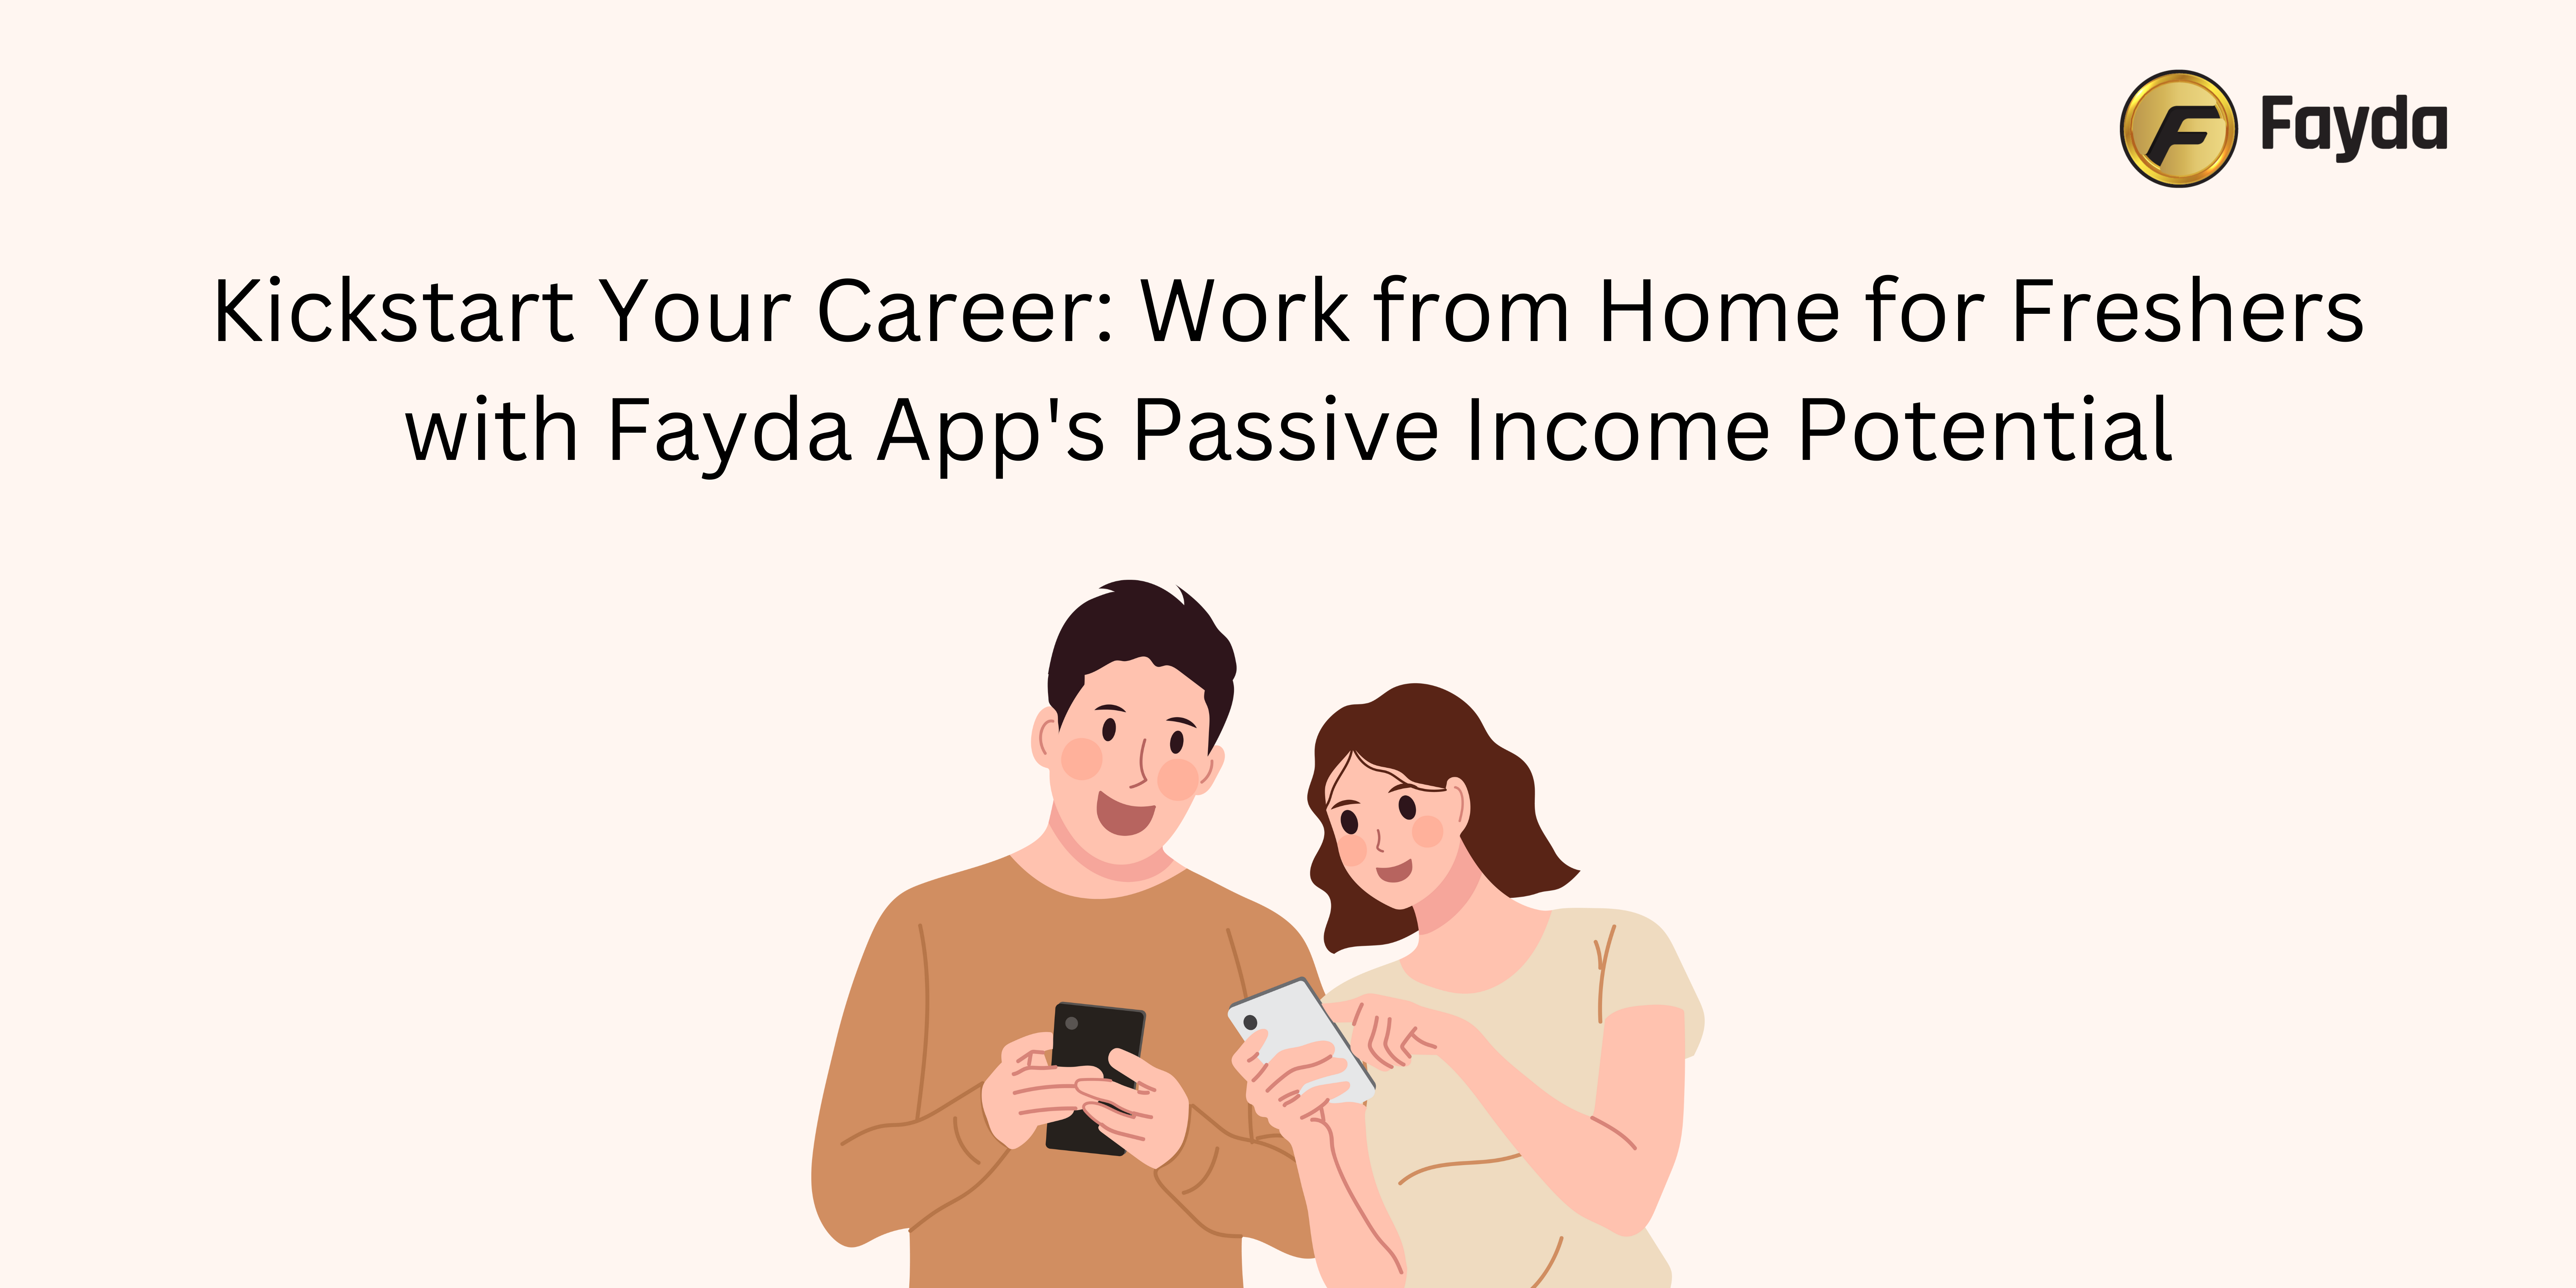 Kickstart Your Career: Work from Home for Freshers with Fayda App's Passive Income Potential